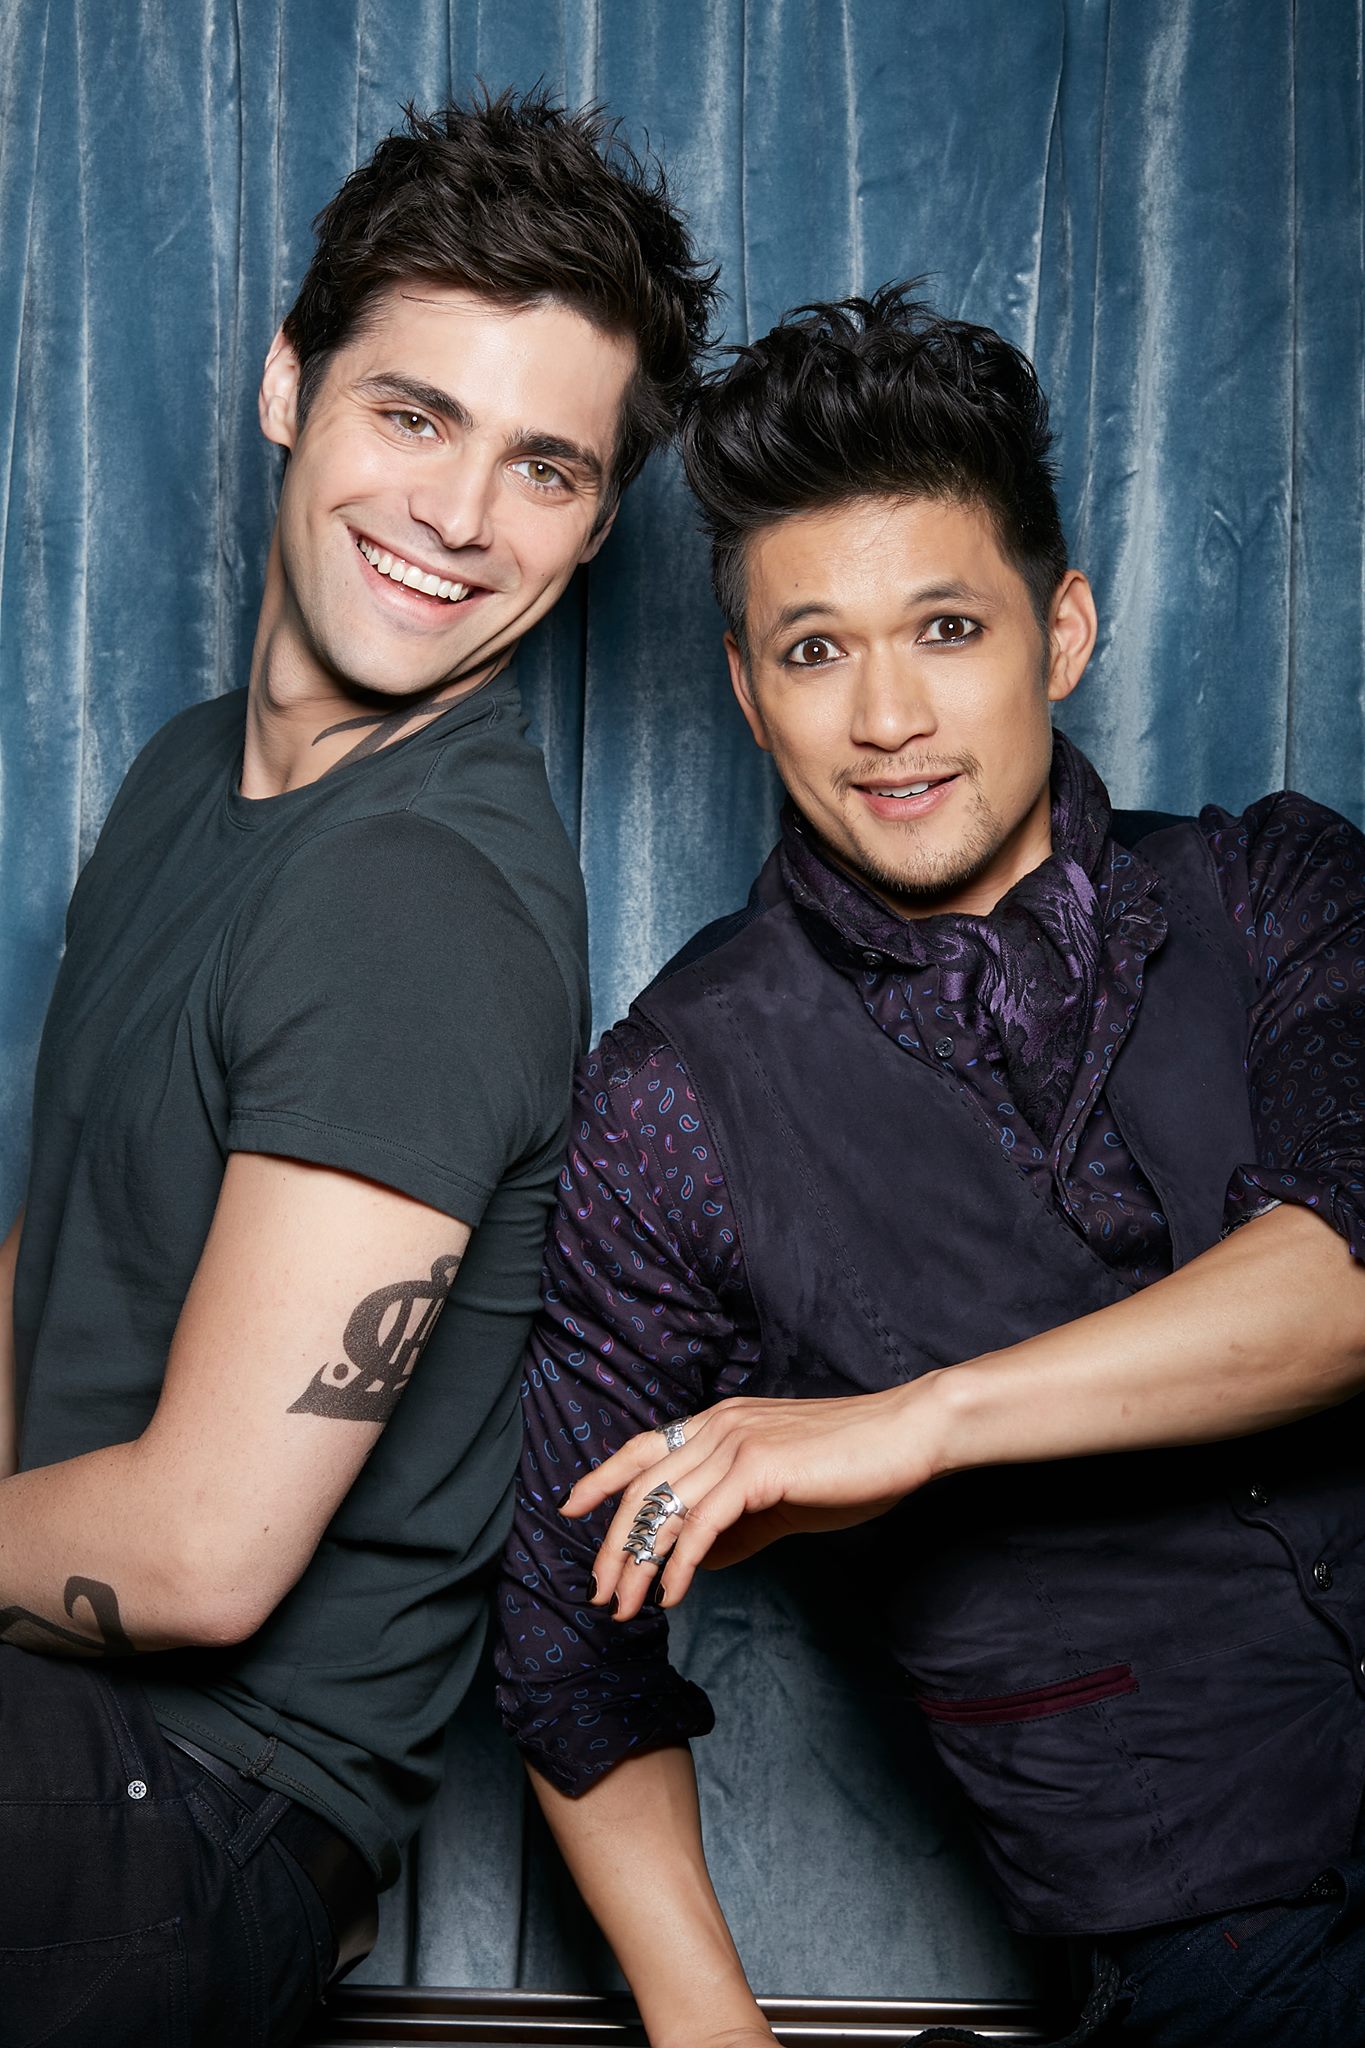 Alec Magnus Image Malec Photobooth Pictures HD Wallpaper And